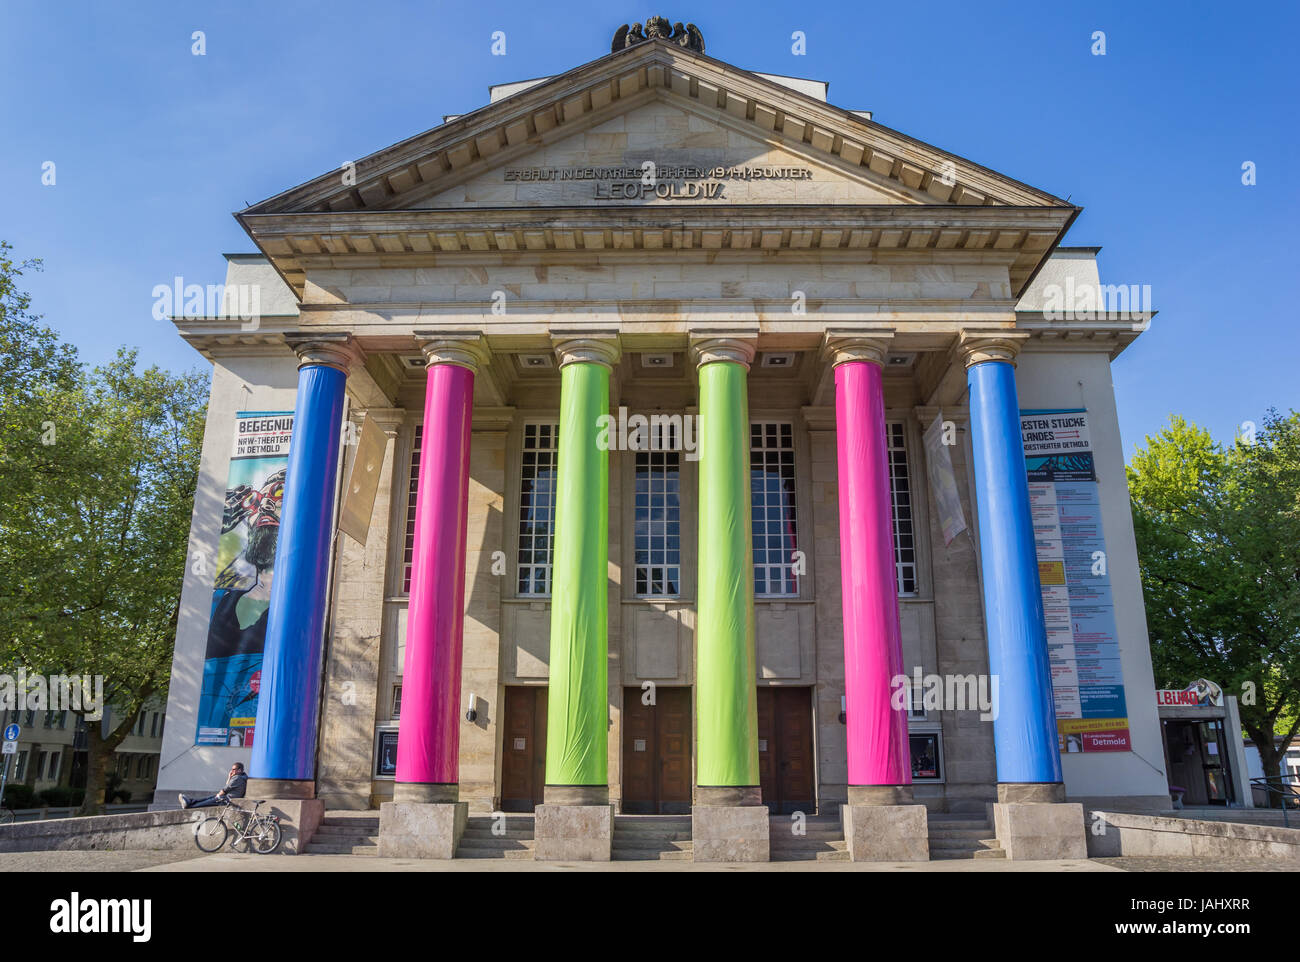 Colorful city steatre in the center of Detmold, Germany Stock Photo